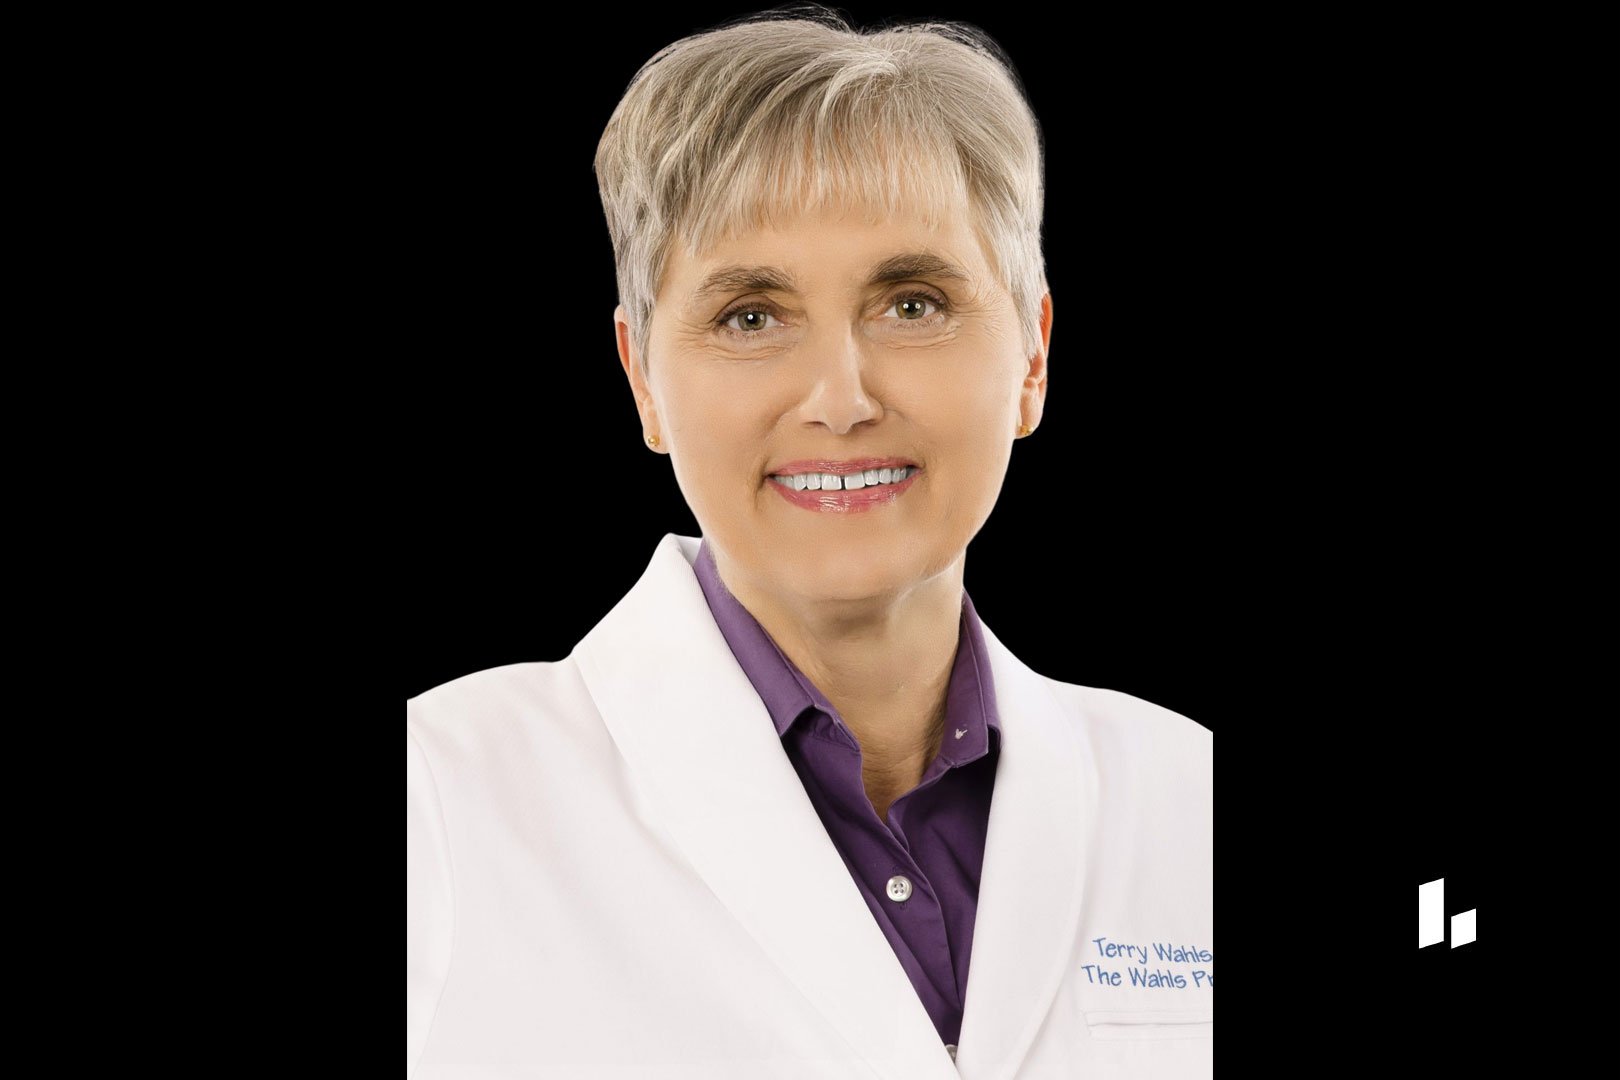 Dr. Terry Wahls Joins Levels as Advisor